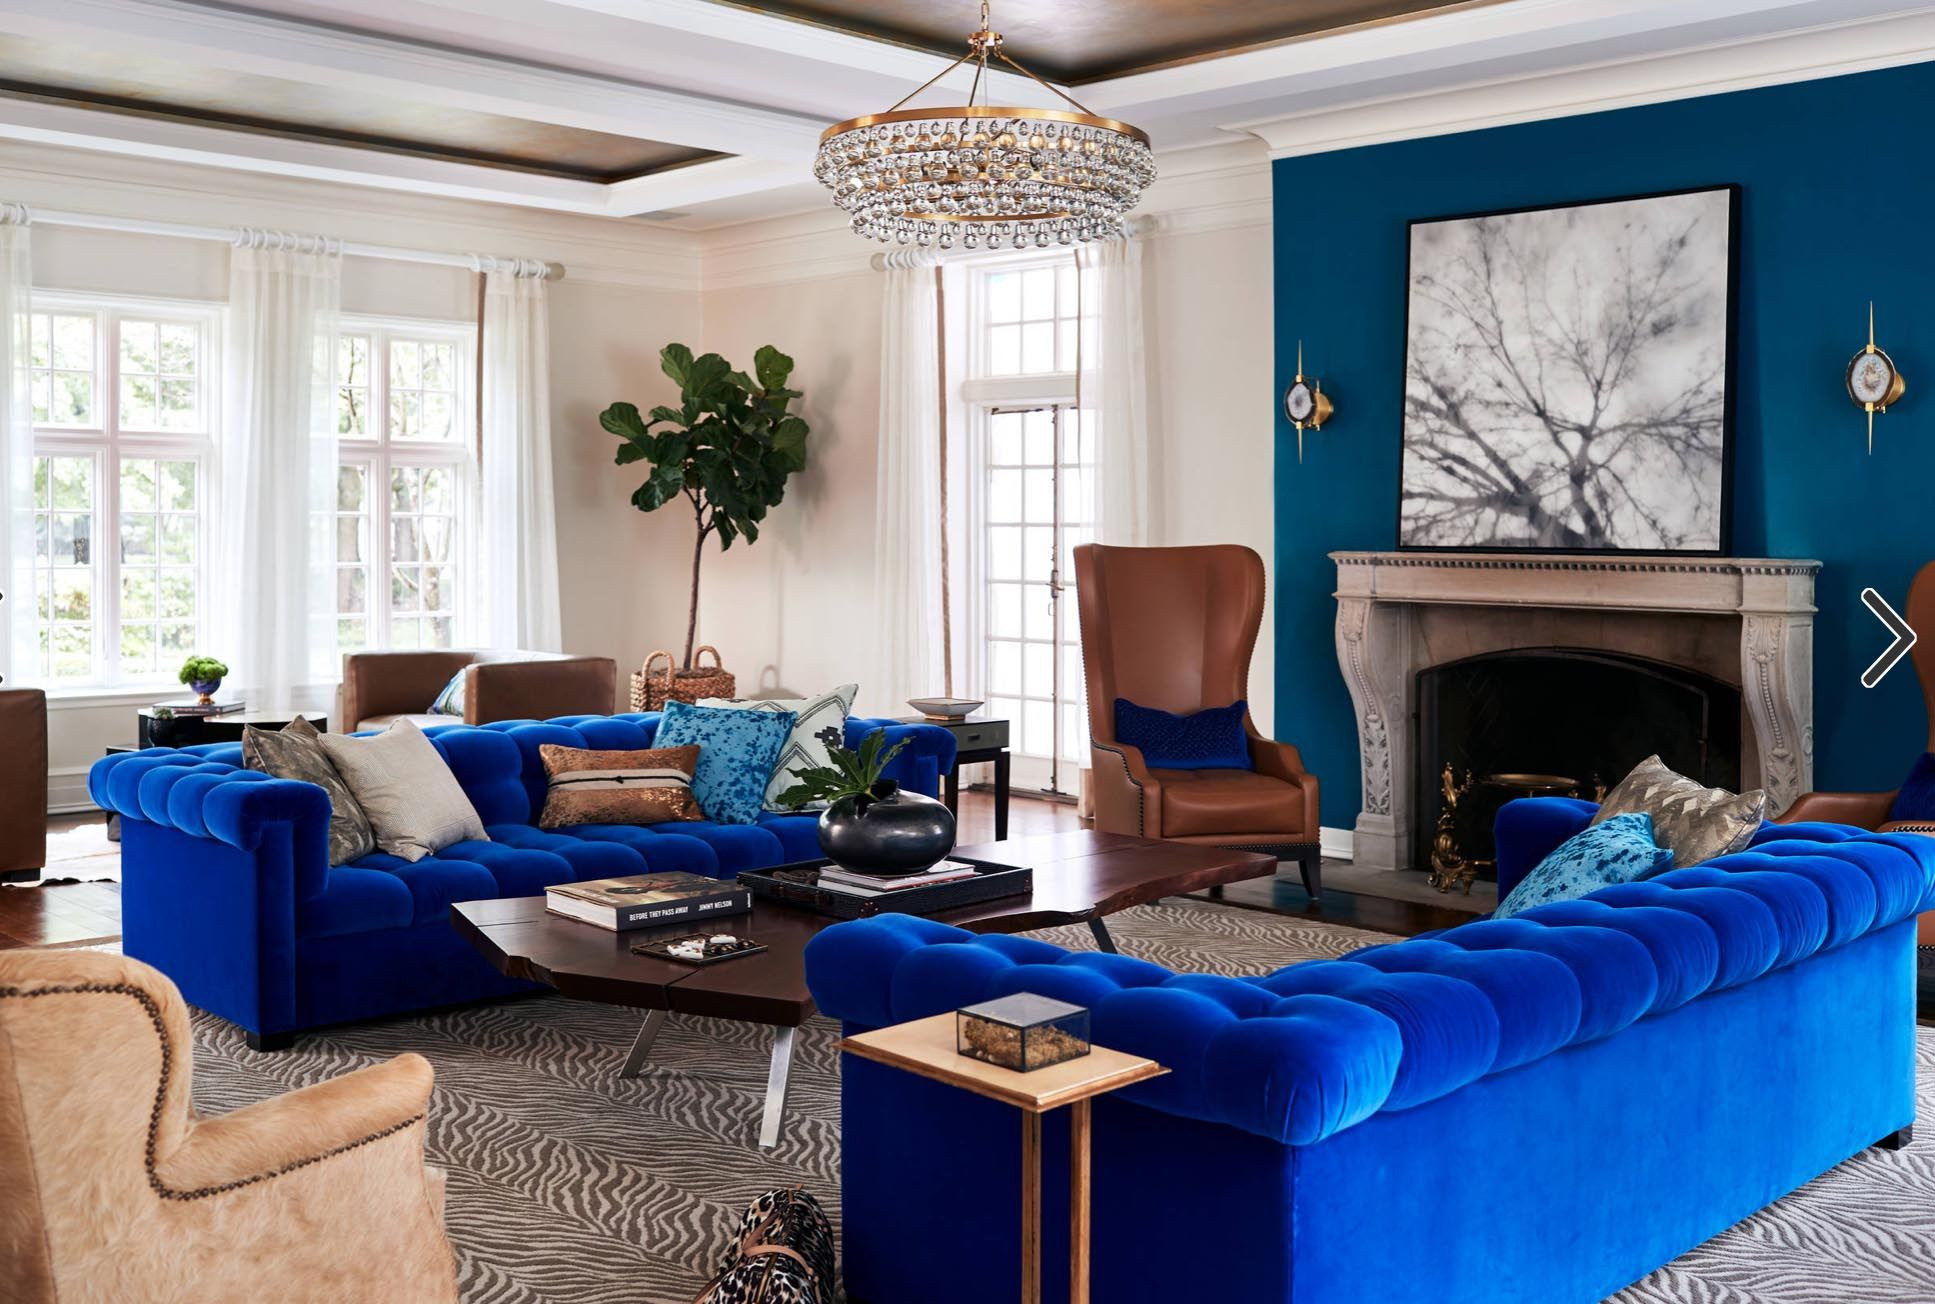 Royal Blue Living Room Ideas
 Pin on Formal living rooms